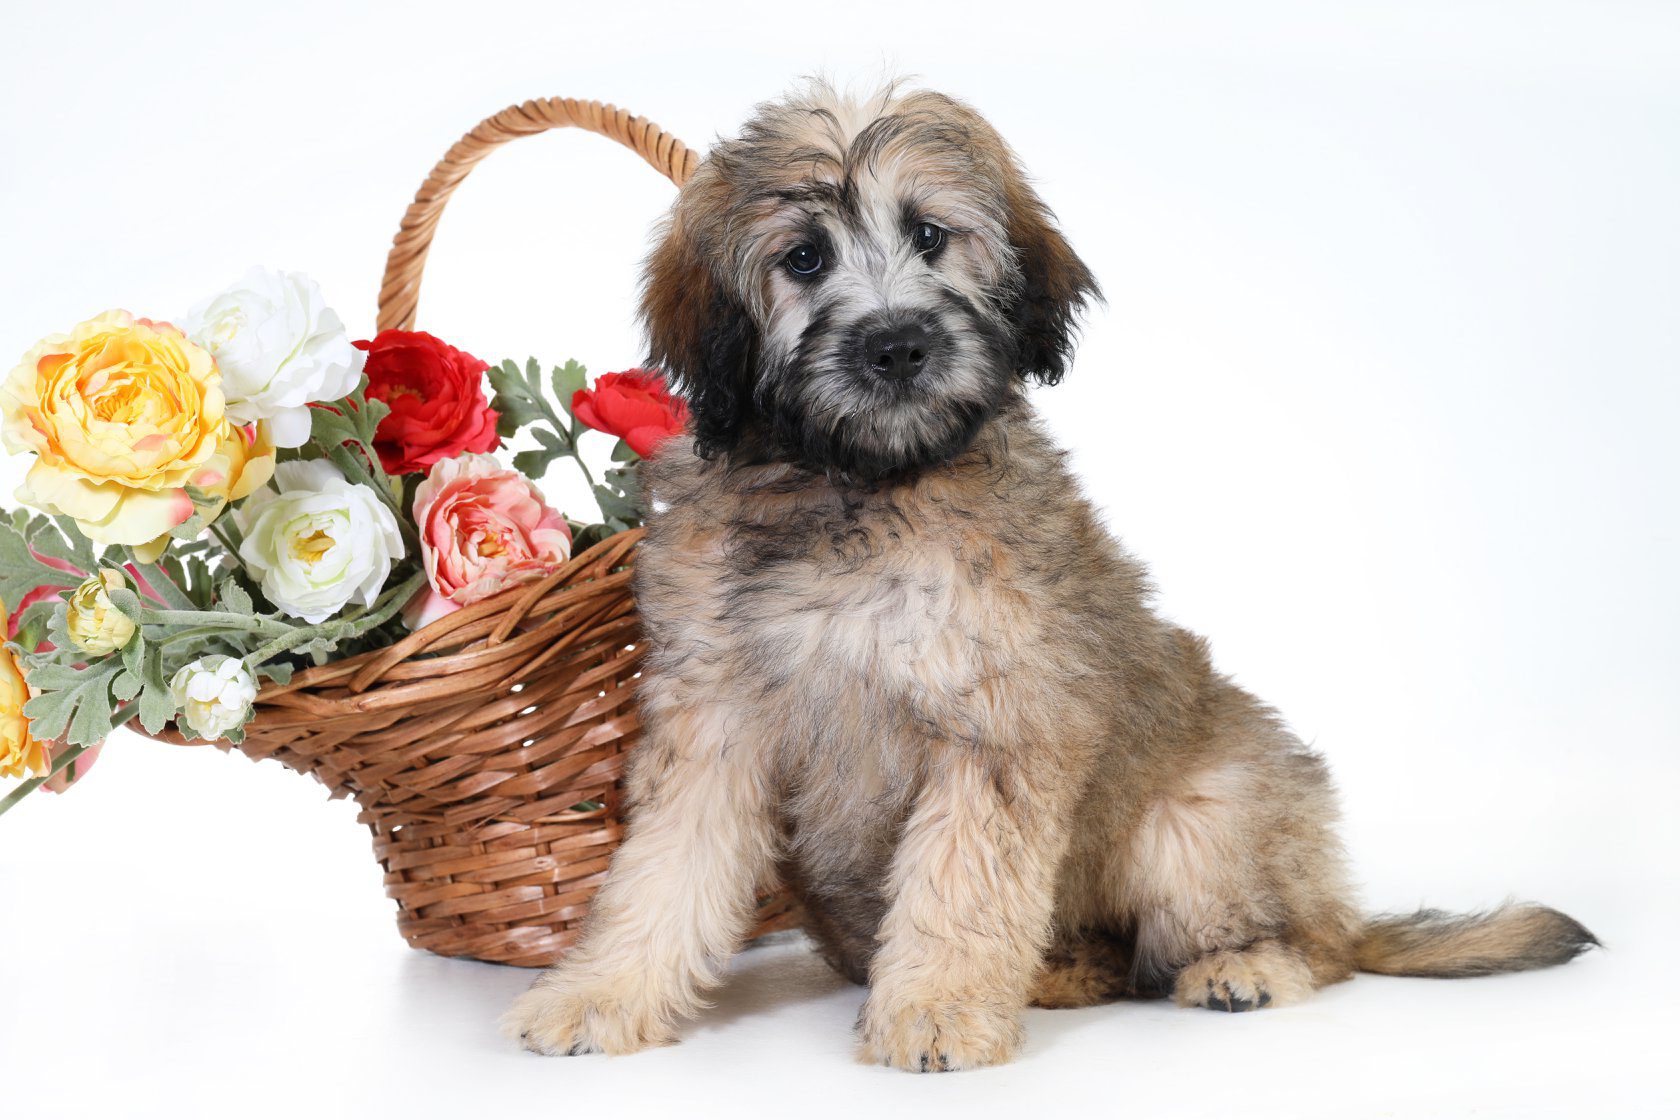 The Smeraglia Teddybear goldendoodle wookie patterned dog is a beautiful sight to behold. With its soft, fluffy coat and adorable face, it's no wonder this dog is so popular. Its pose for the camera is sure to capture your heart.